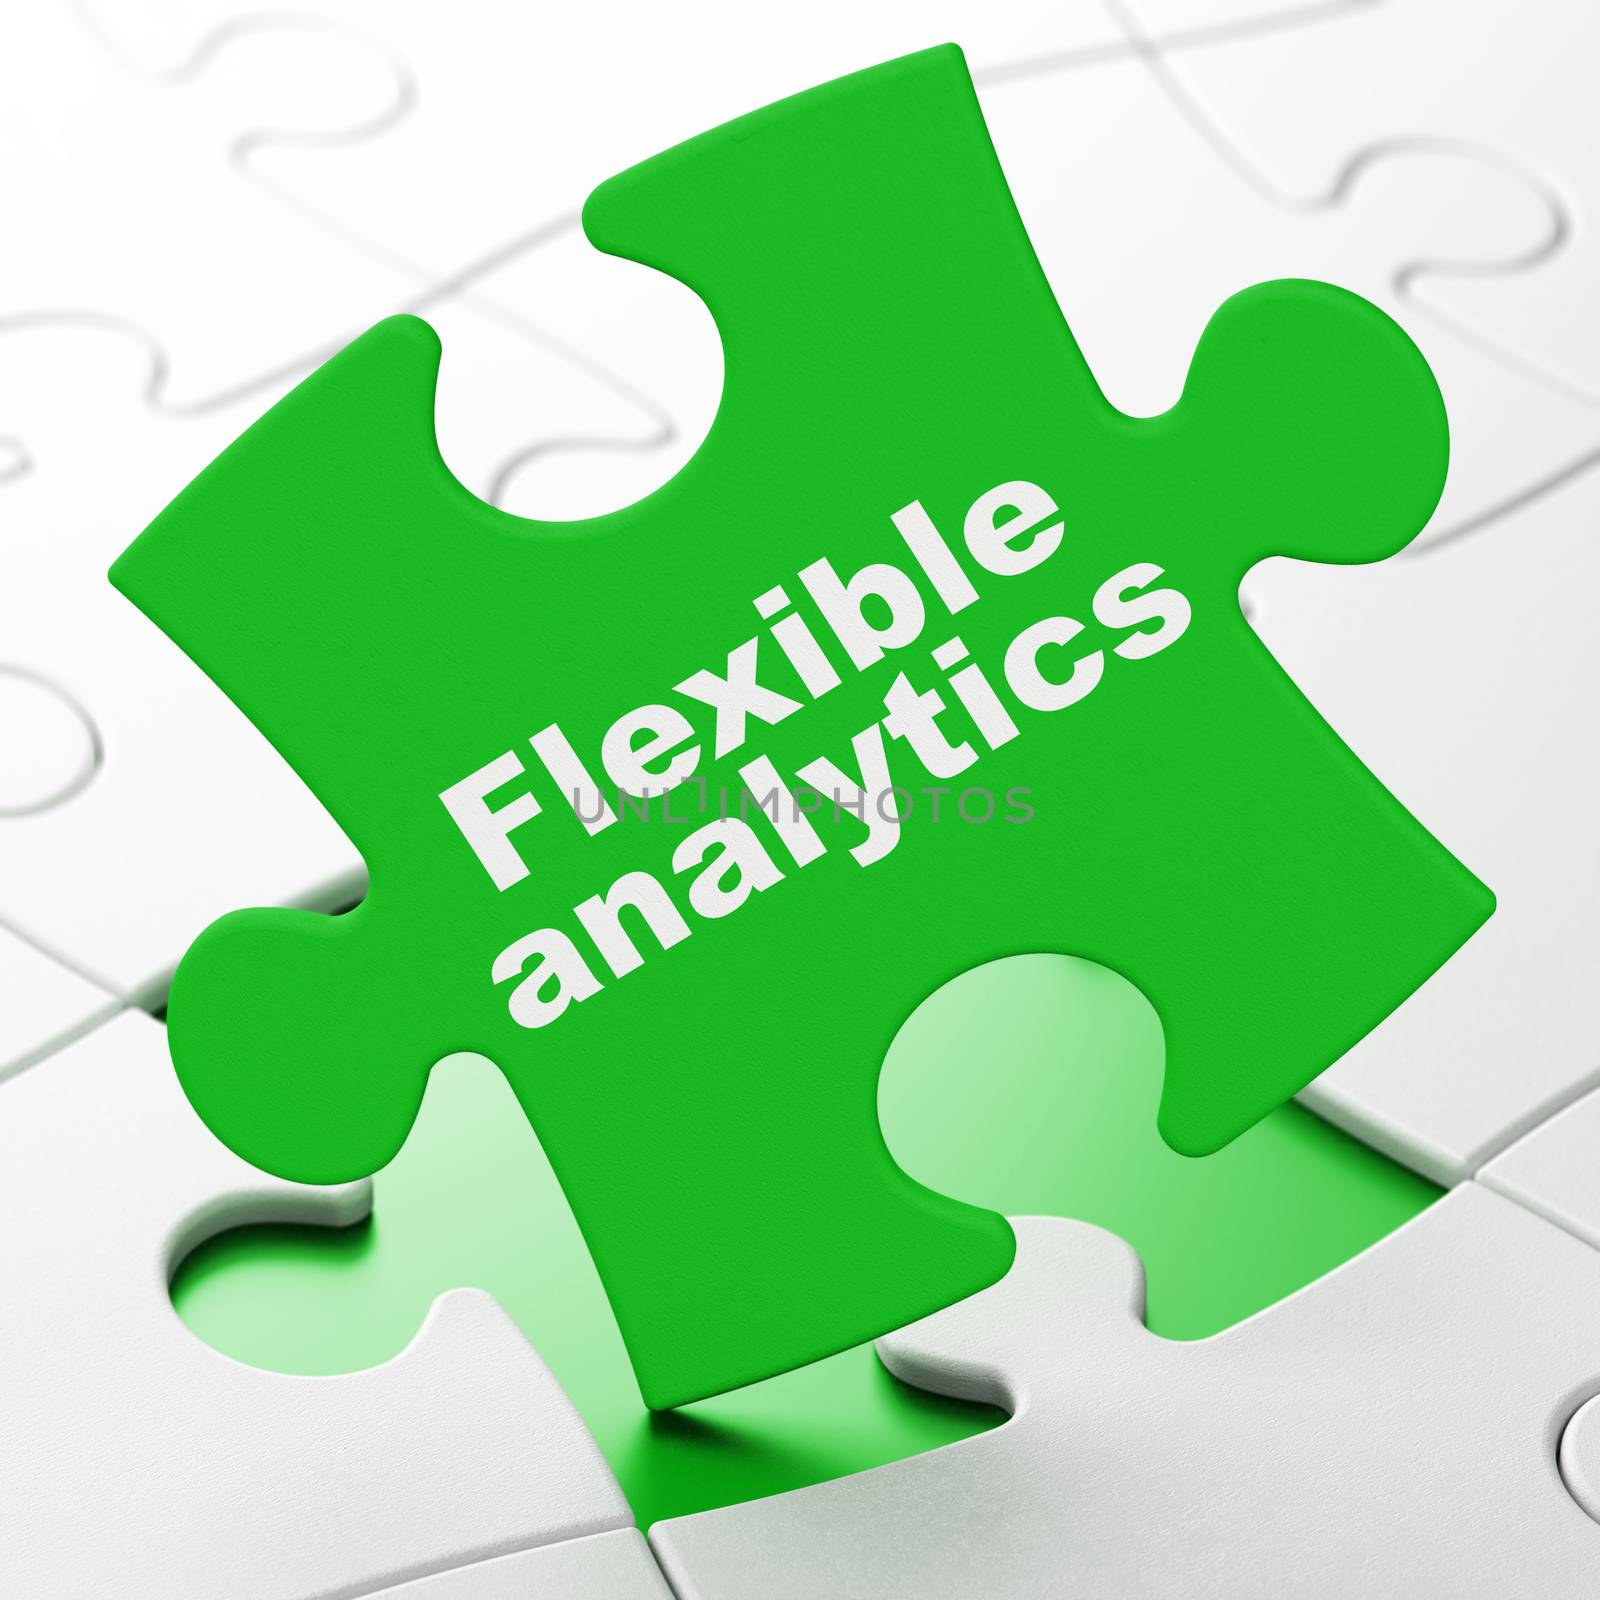 Finance concept: Flexible Analytics on Green puzzle pieces background, 3D rendering